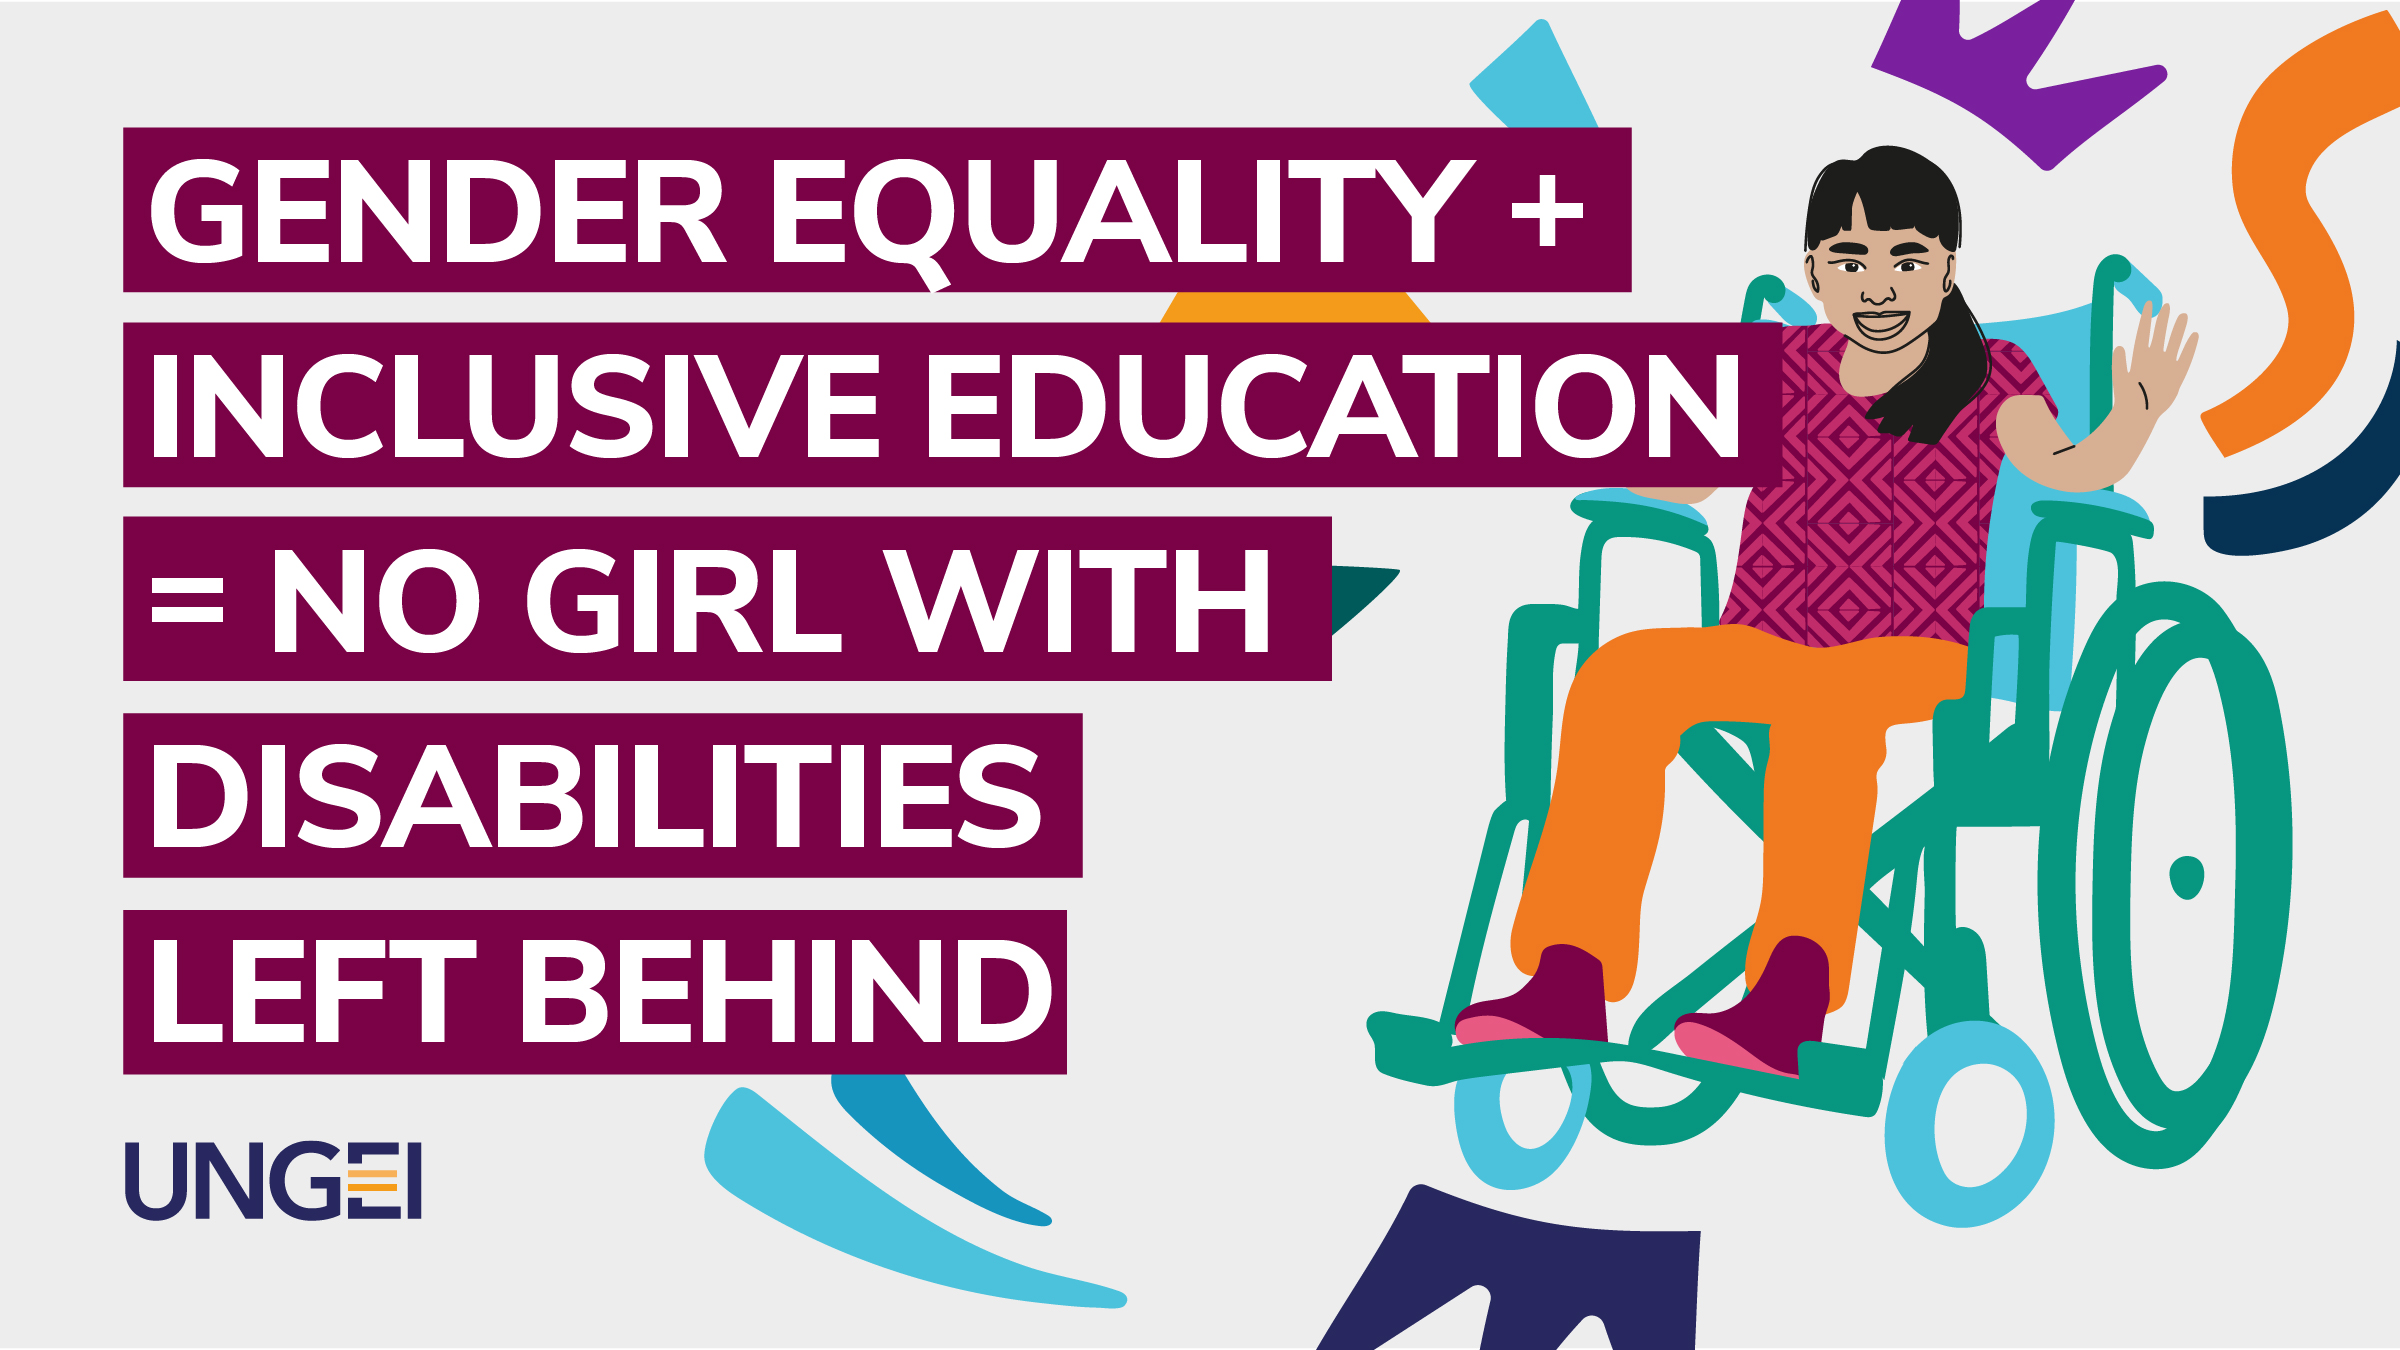 Gender equality + inclusive education = no girl with disabilities left behind